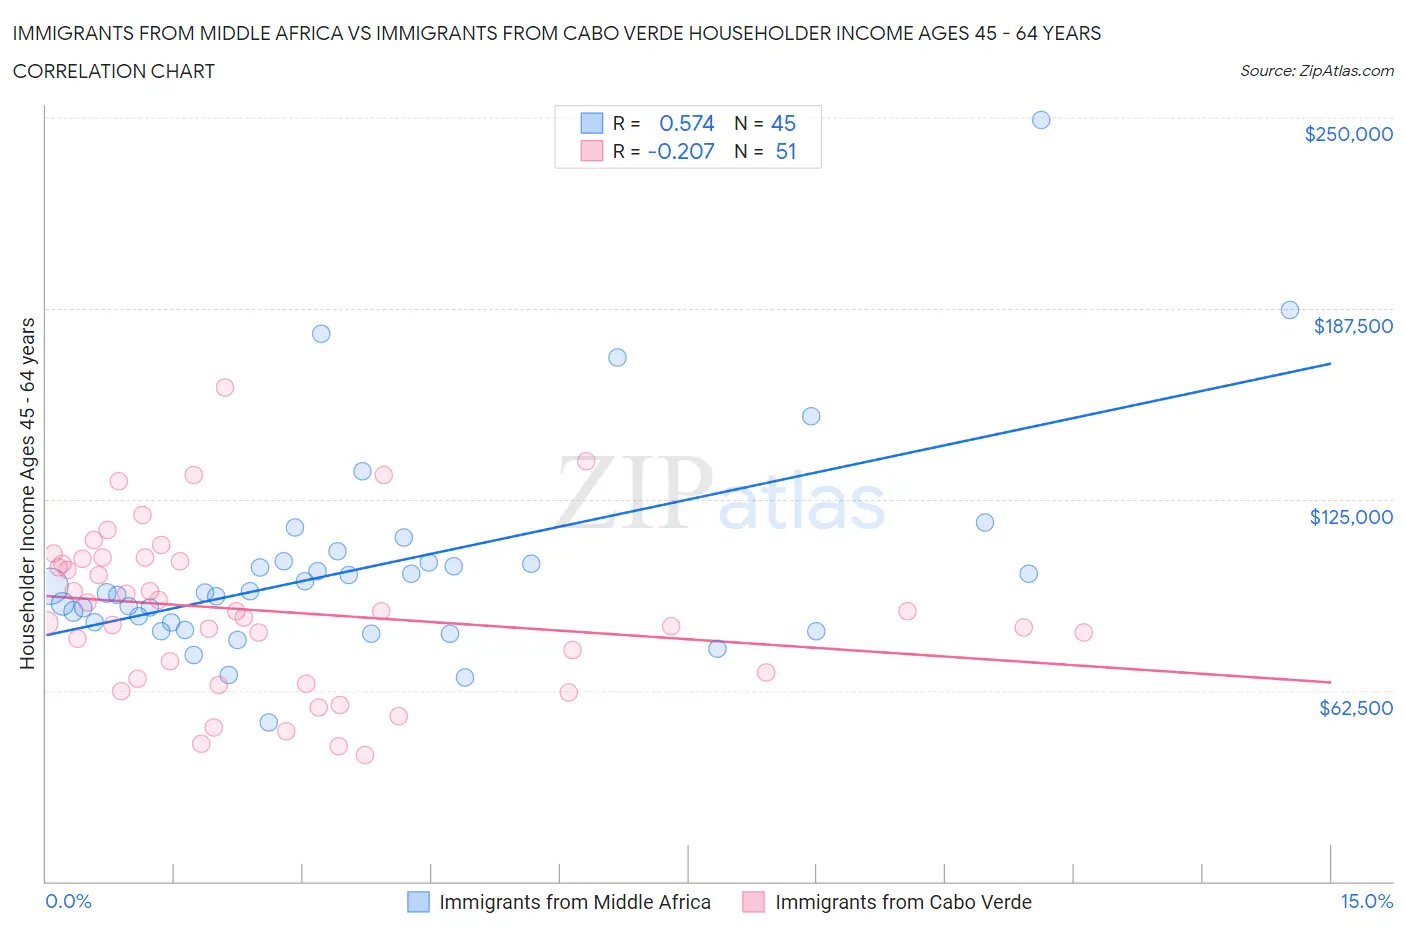 Immigrants from Middle Africa vs Immigrants from Cabo Verde Householder Income Ages 45 - 64 years